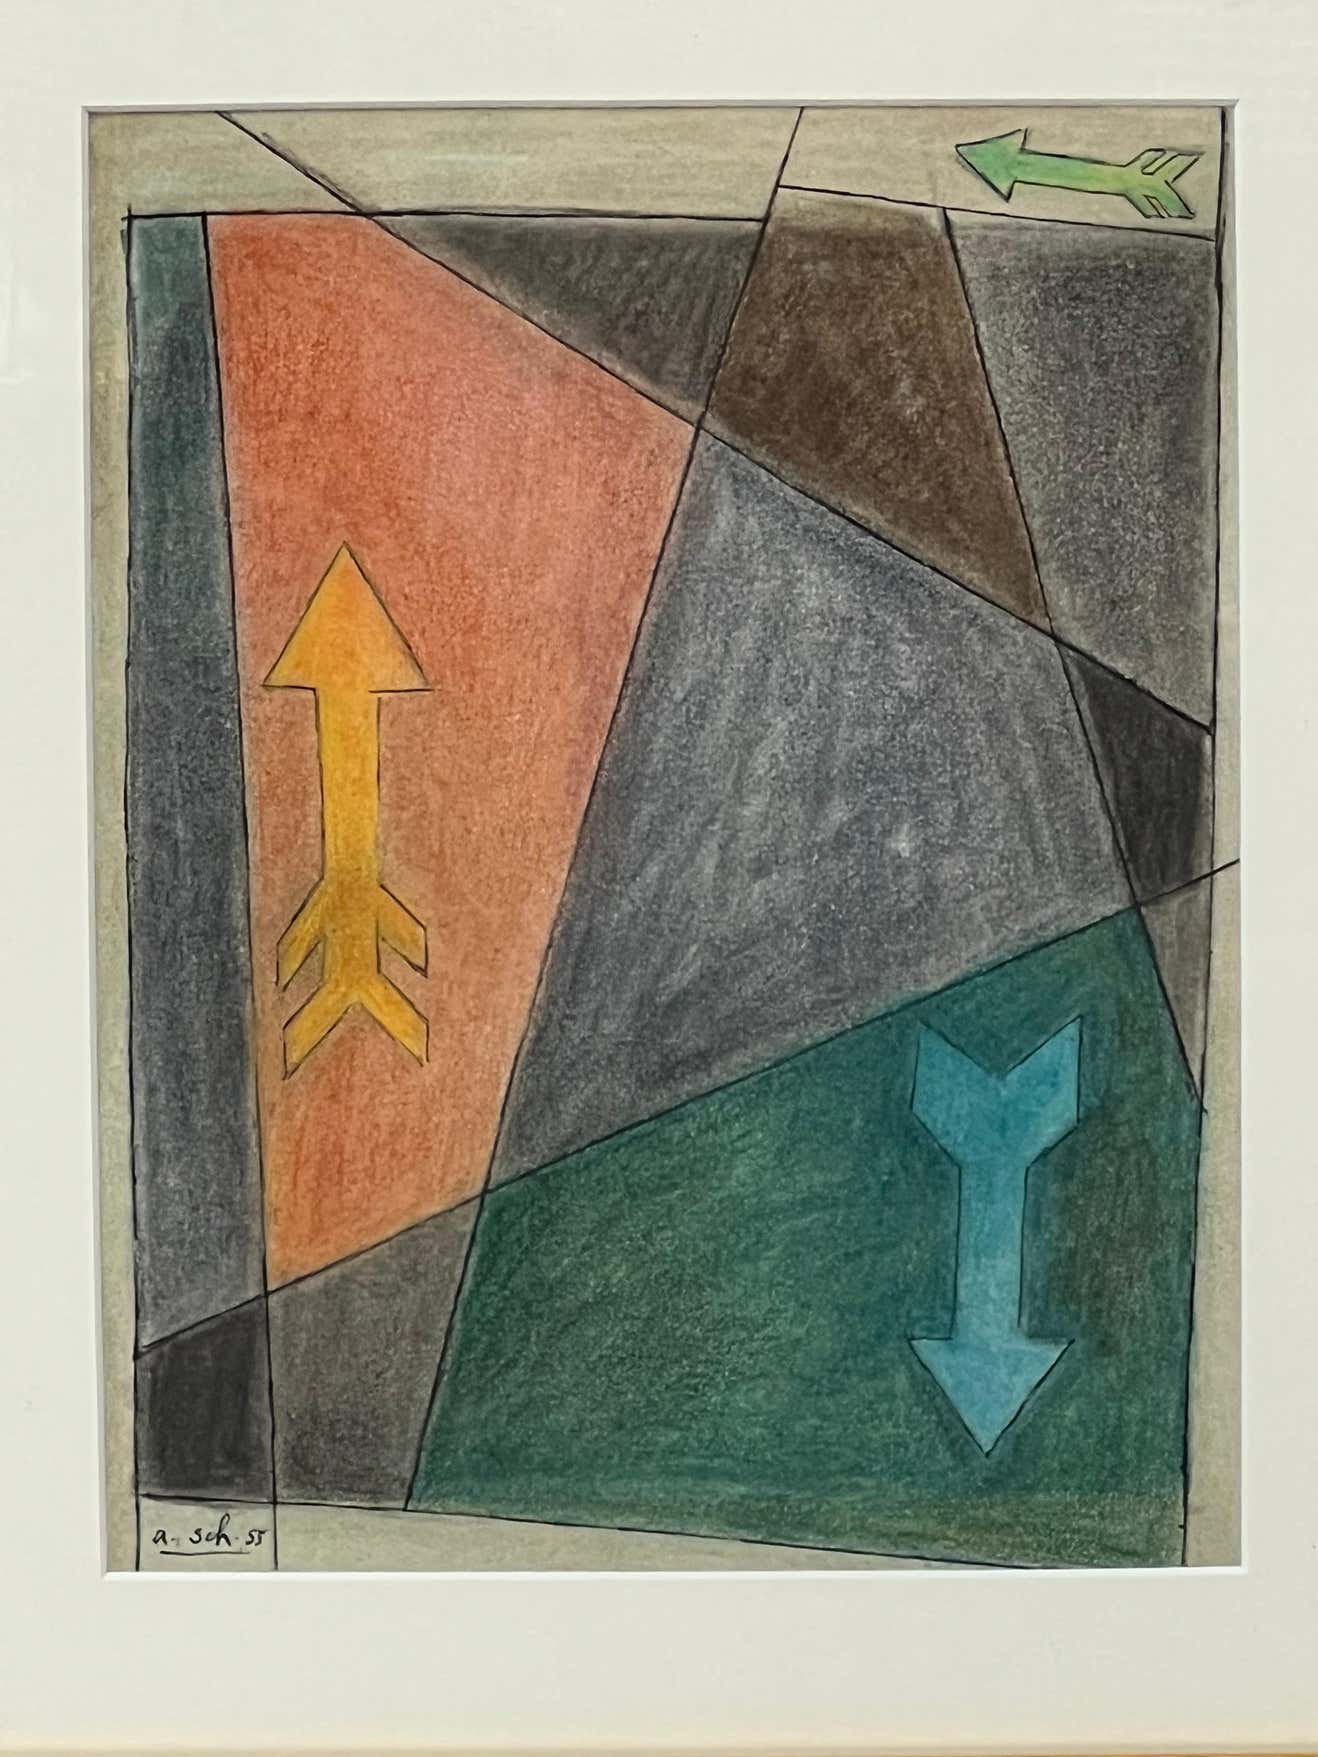 Drawing #2 by Amalia Schulthess in Gold Frame - 1955